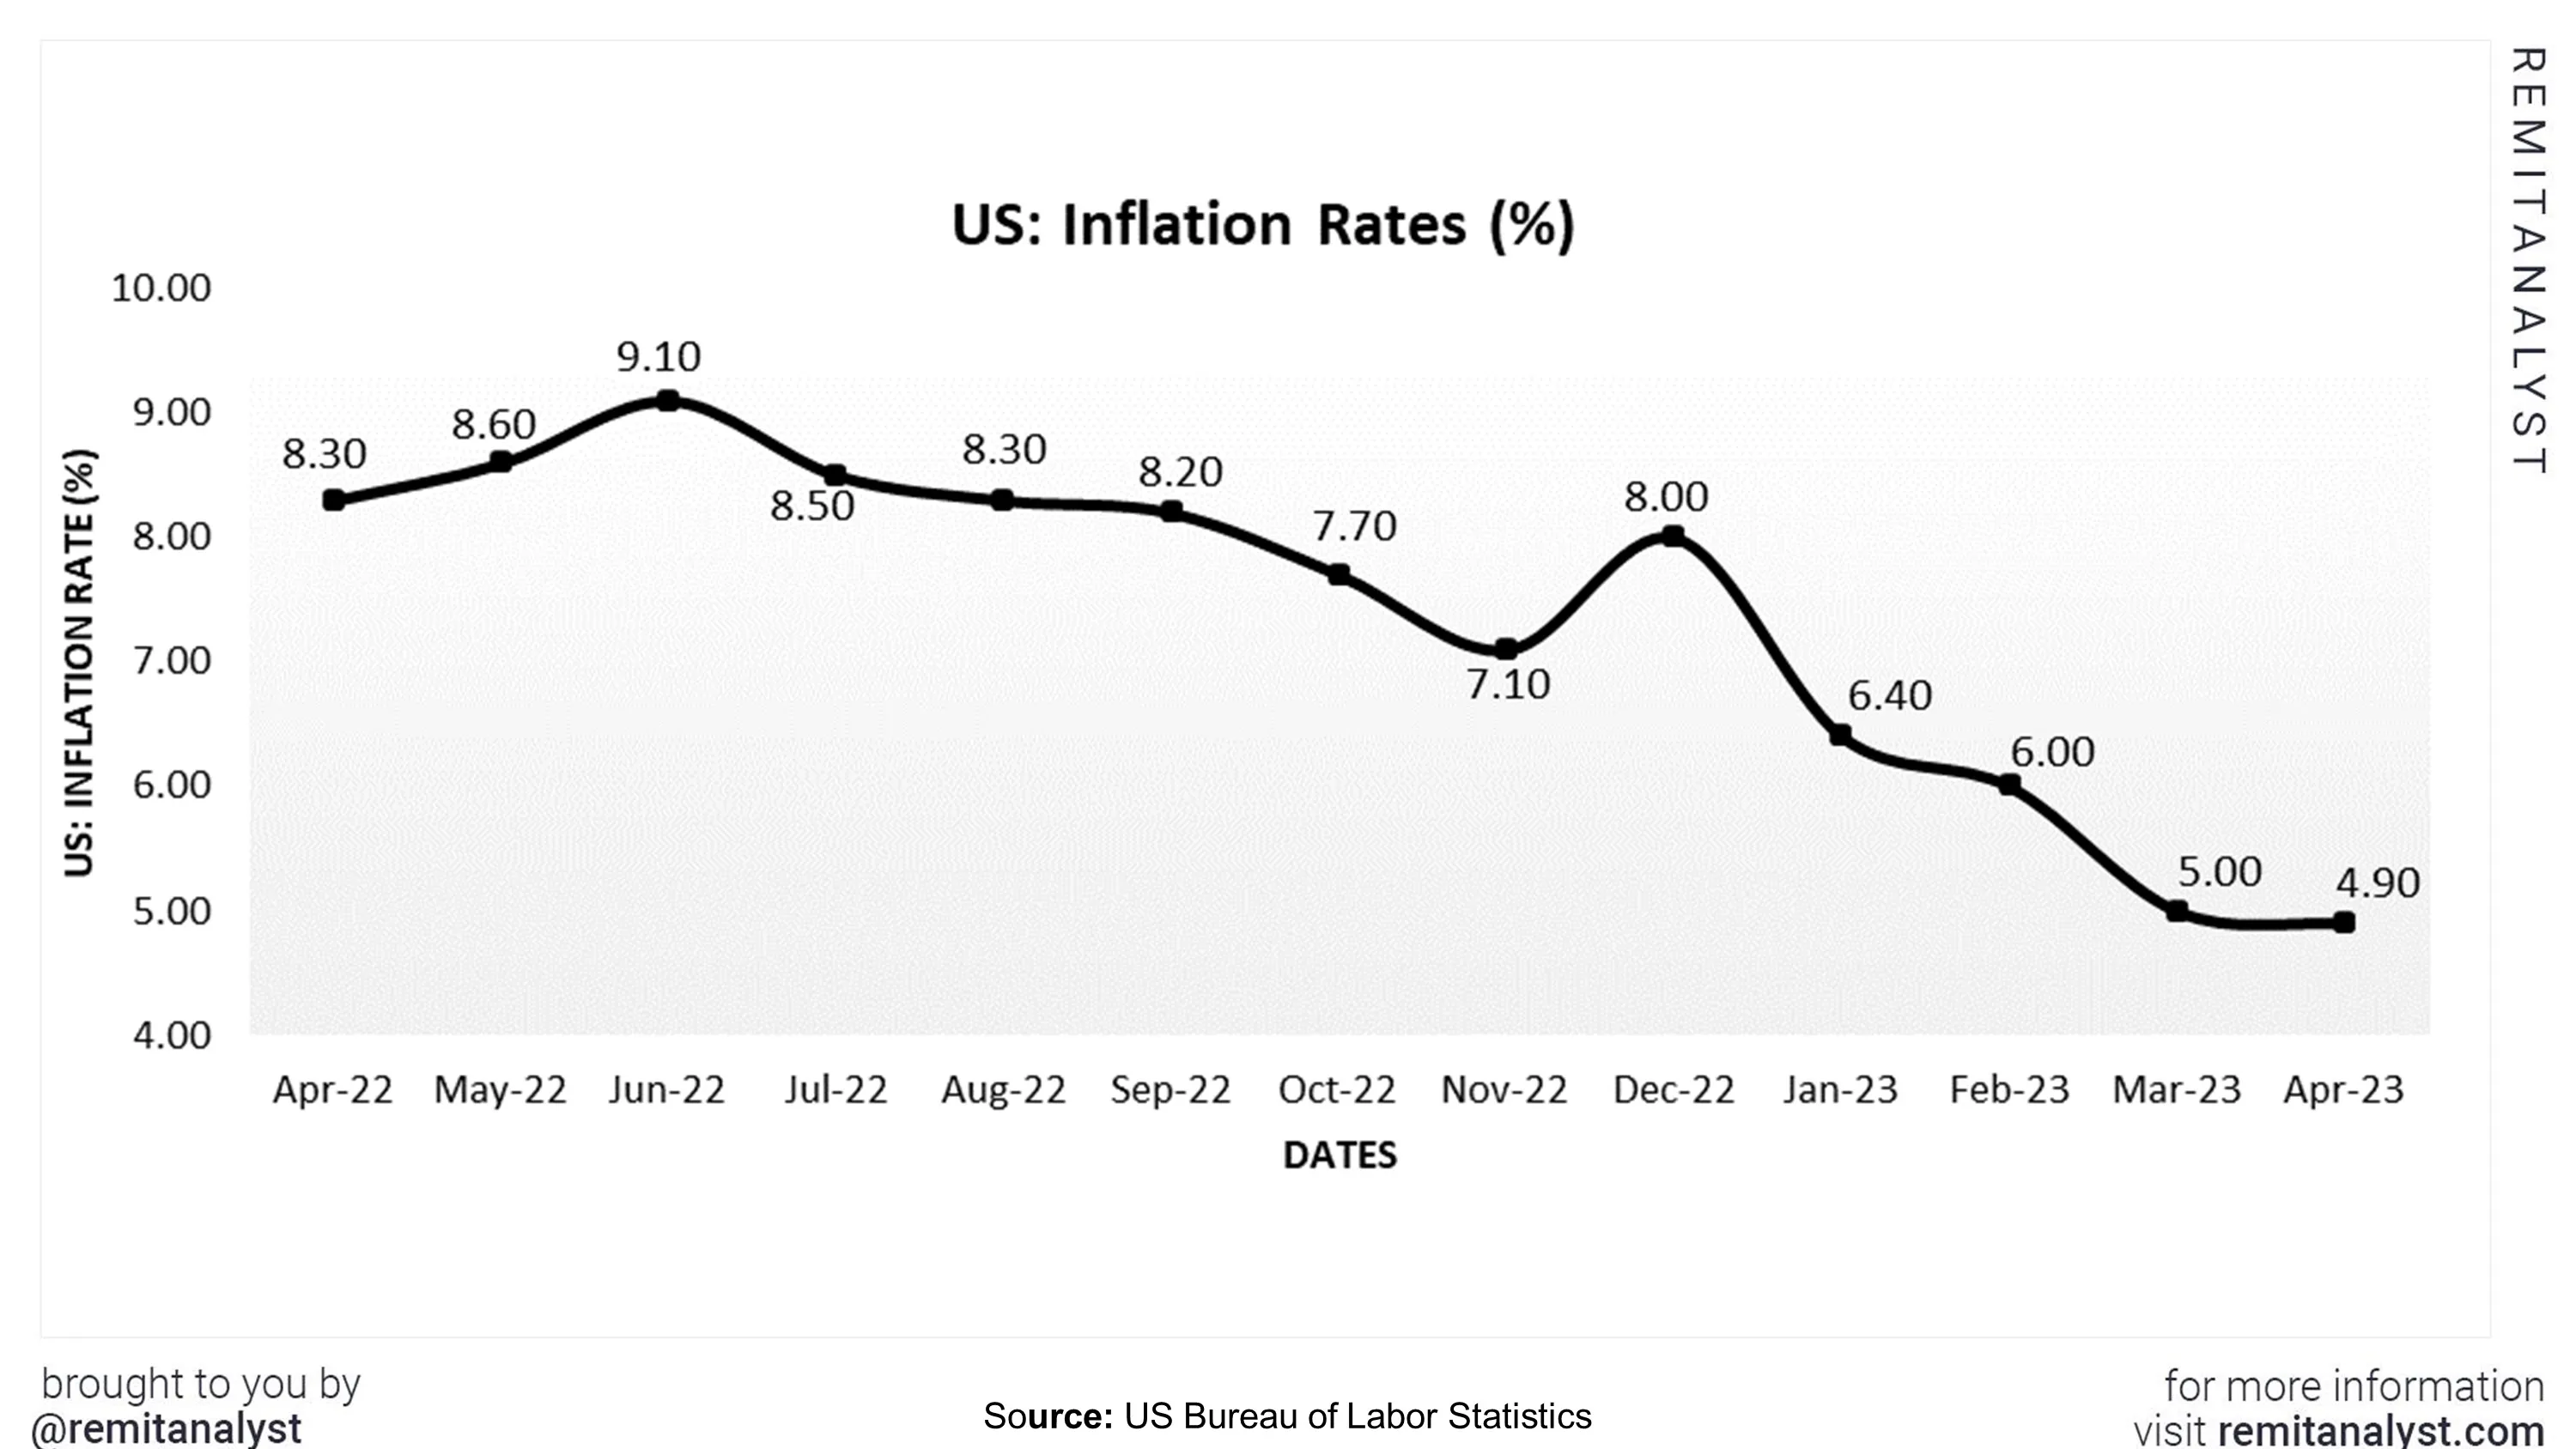 inflation-rates-in-us-from-apr-2022-to-apr-2023